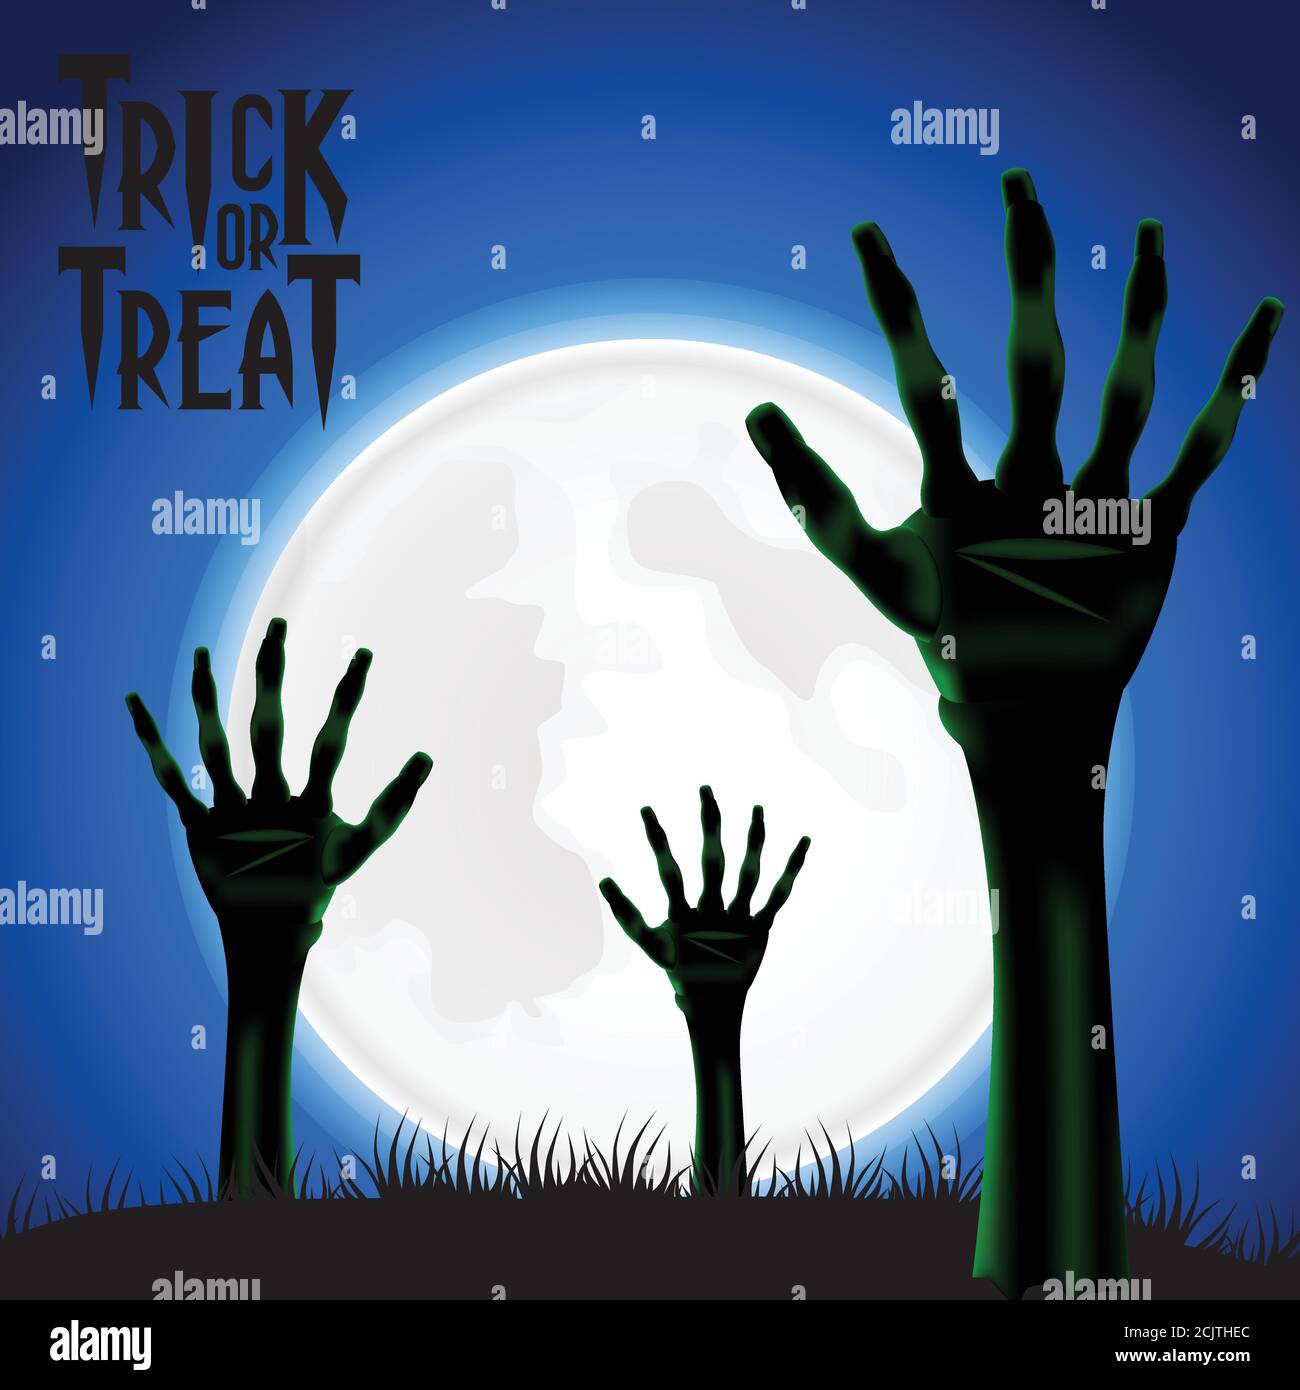 Trick or treat halloween party banner invitation with illustration of zombie hand corpse Stock Vector